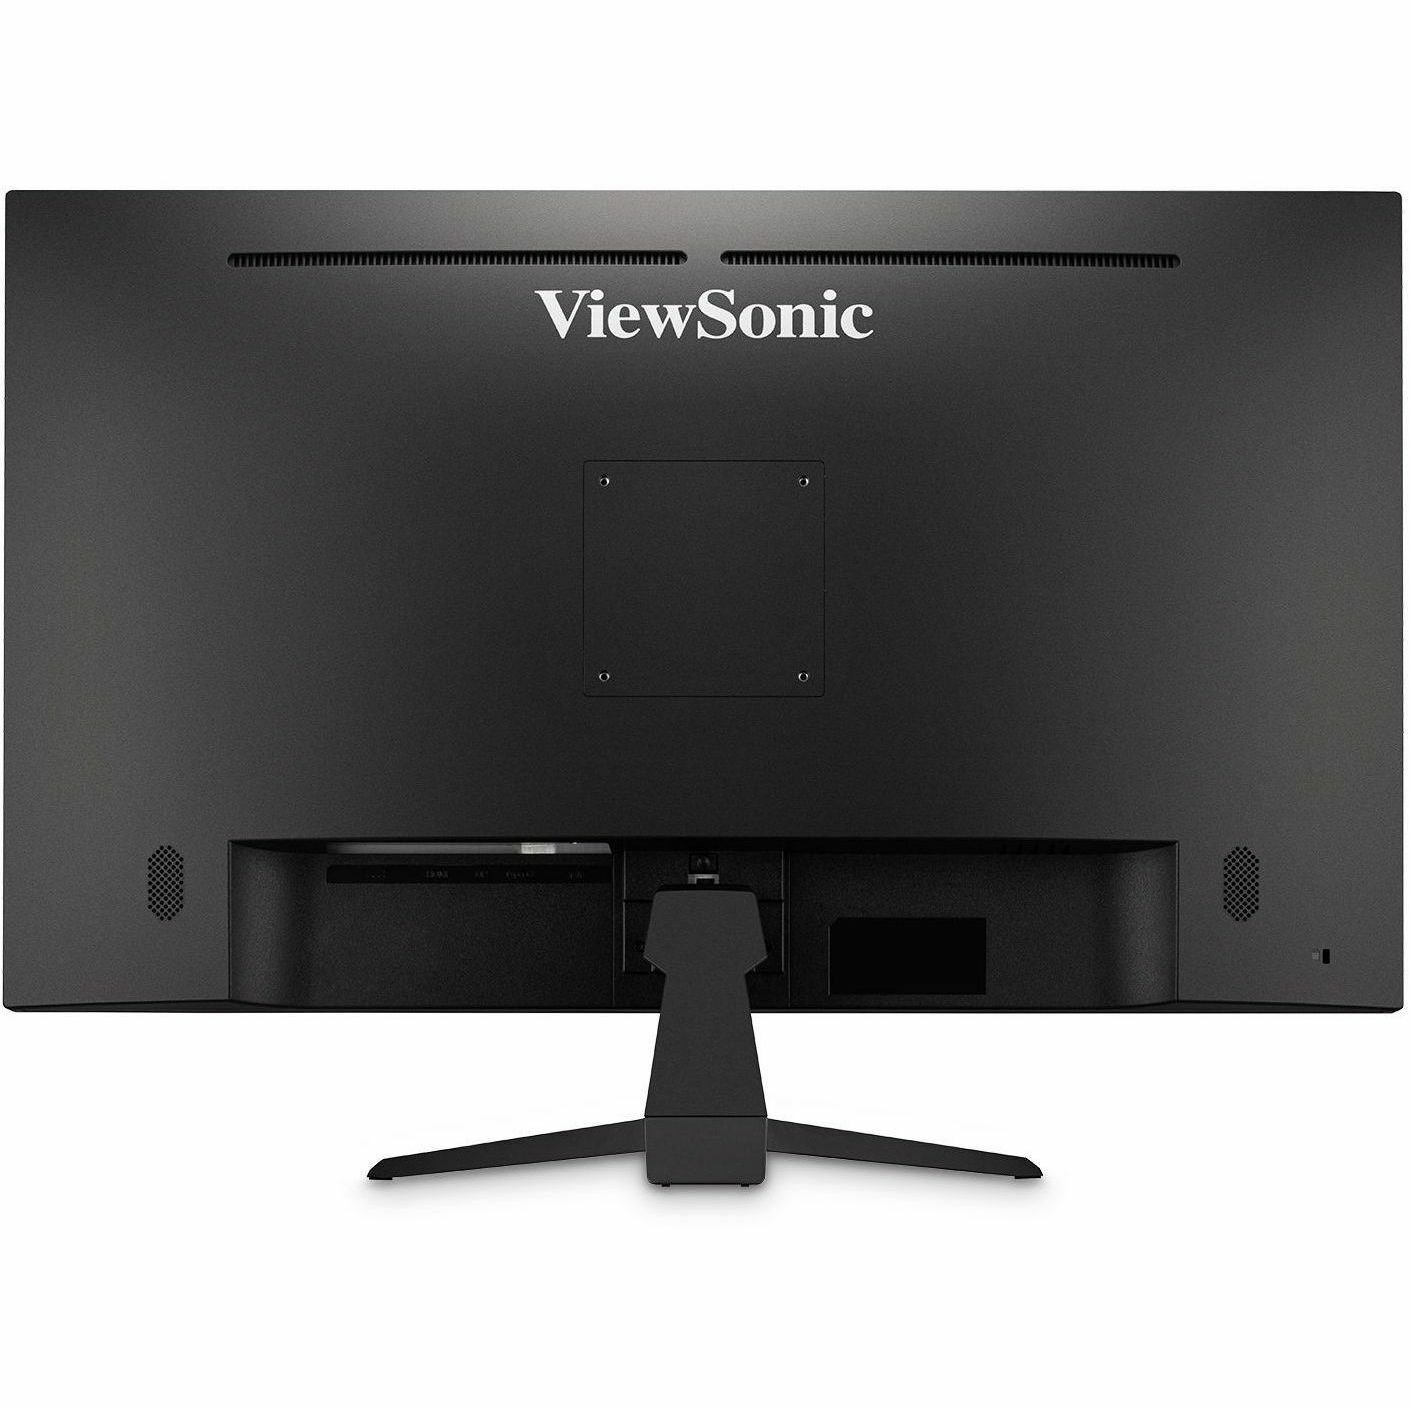 ViewSonic VX3267U-2K 32 Inch 1440p IPS Monitor with 65W USB C, HDR10 Content Support, Ultra-Thin Bezels, Eye Care, HDMI, and DP Input